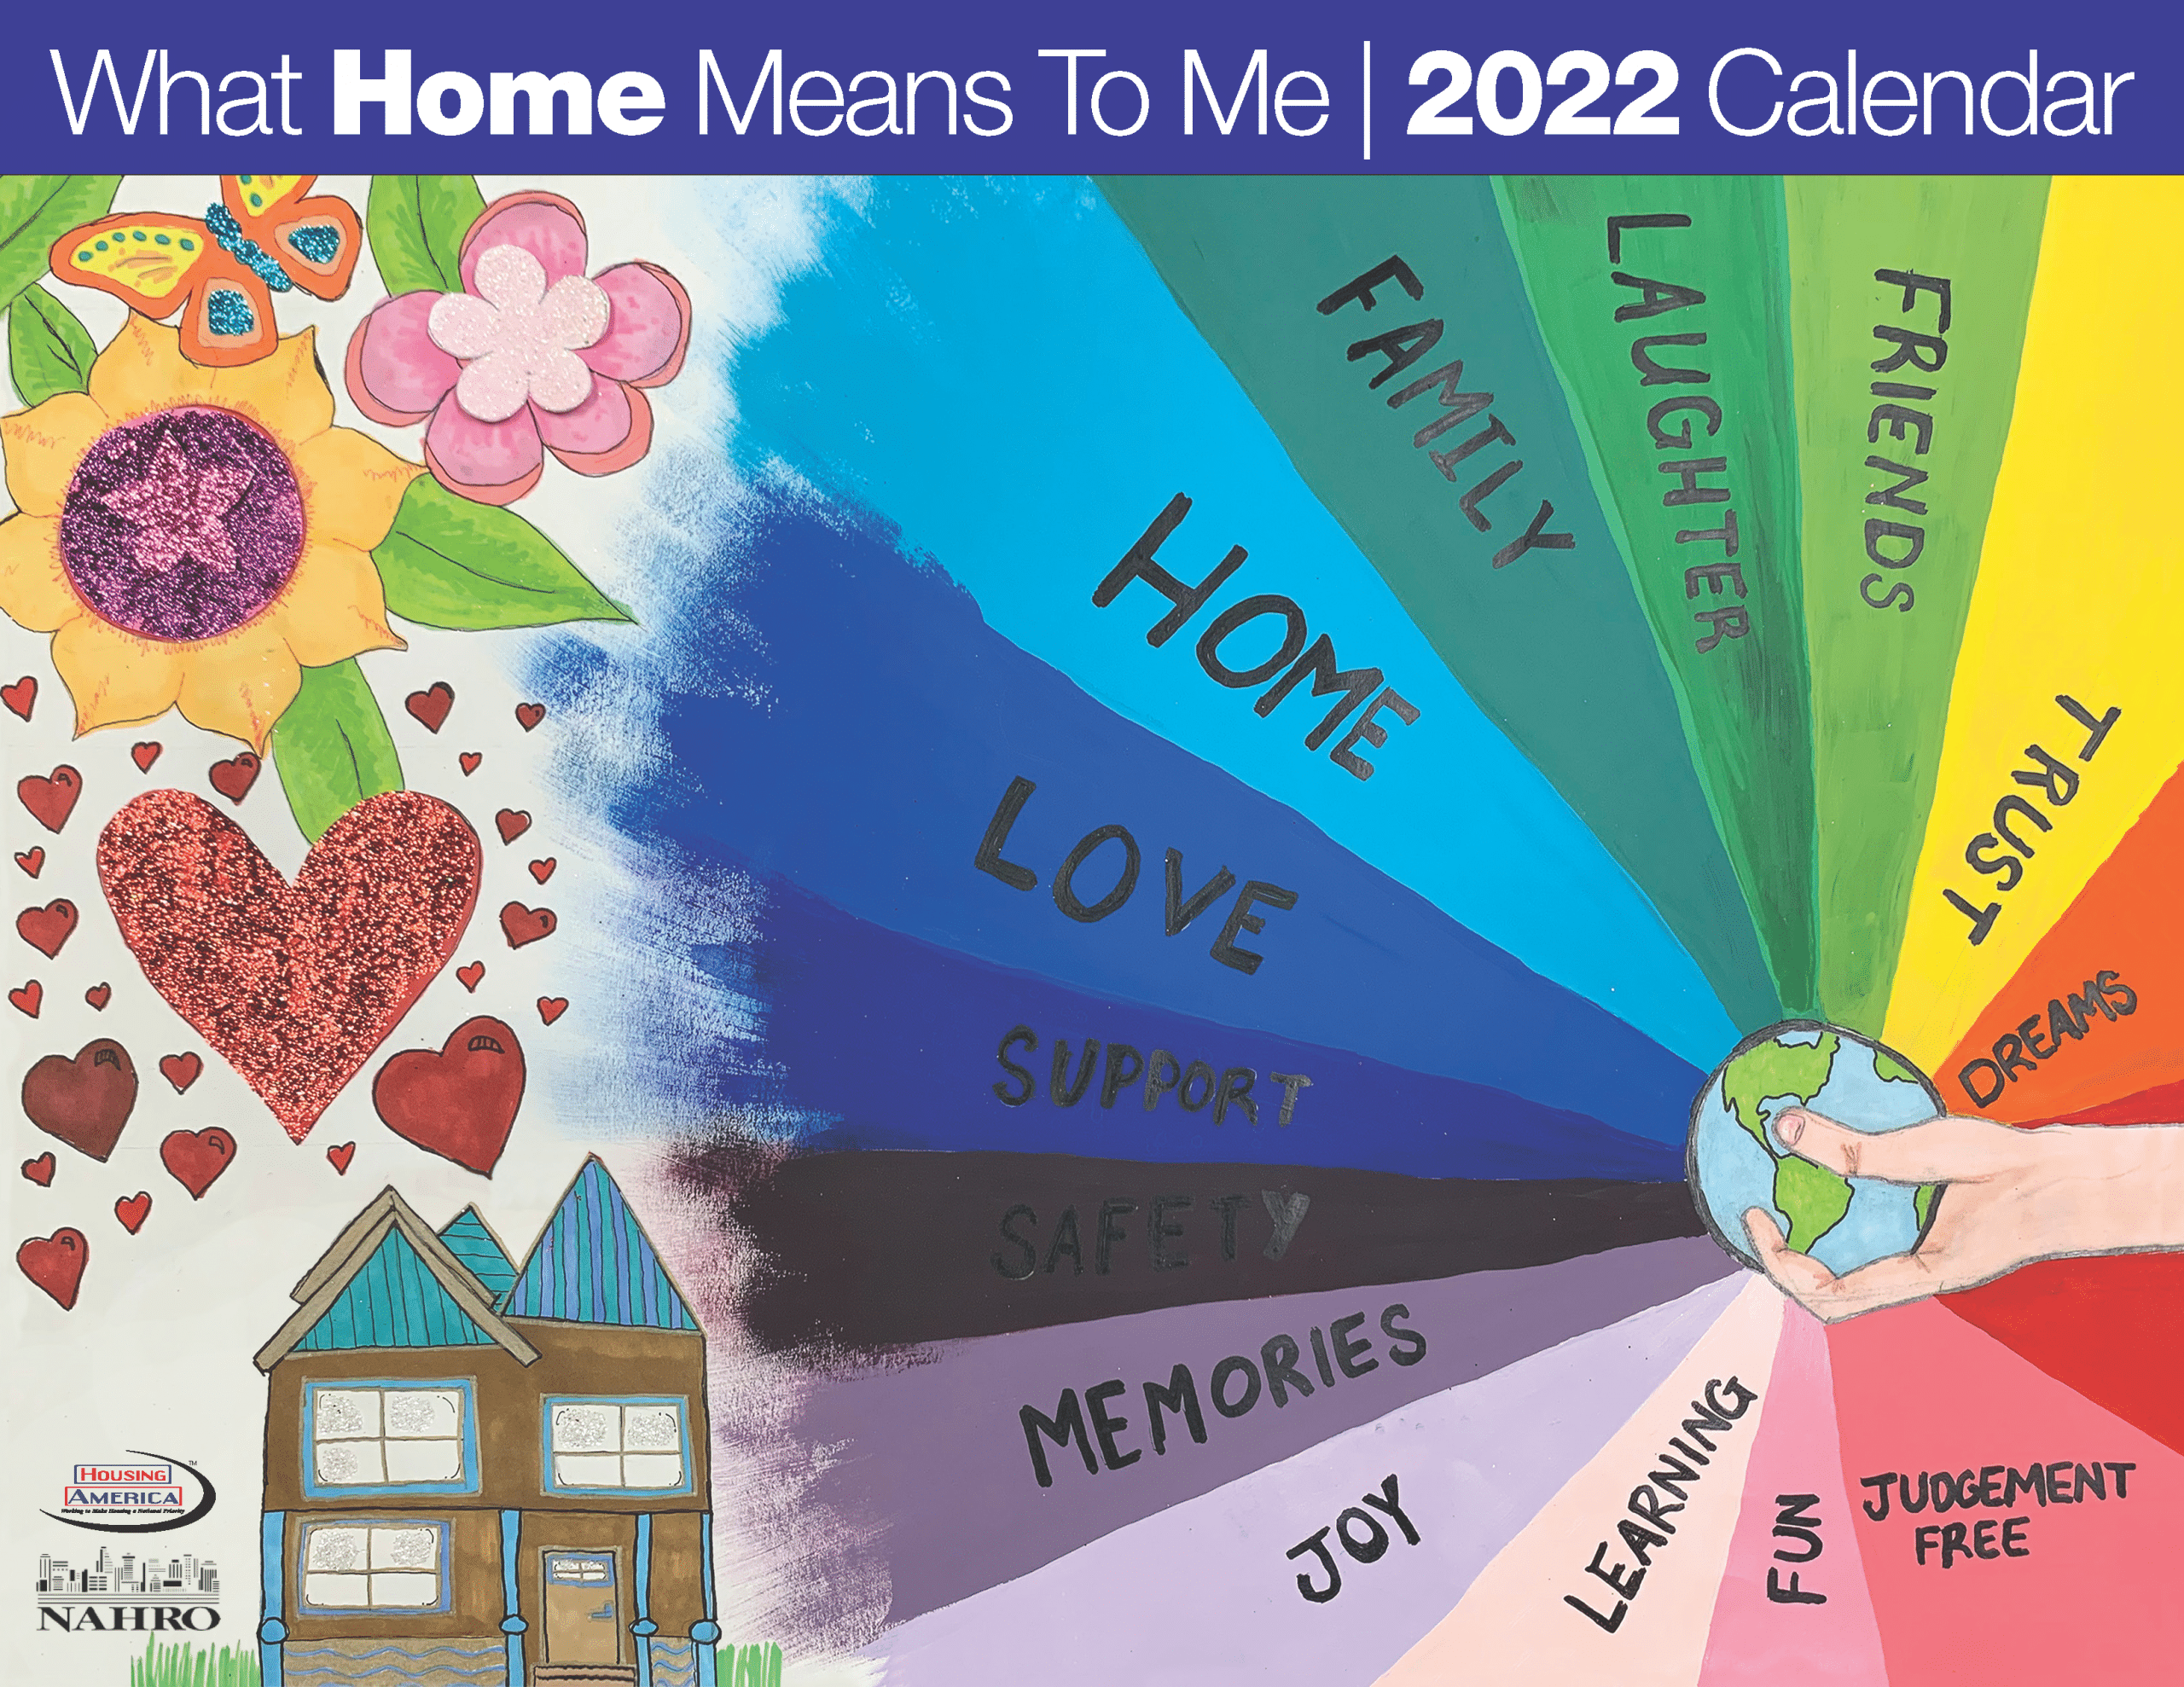 What Home Means to Me Calendars on Sale Now! The National Association